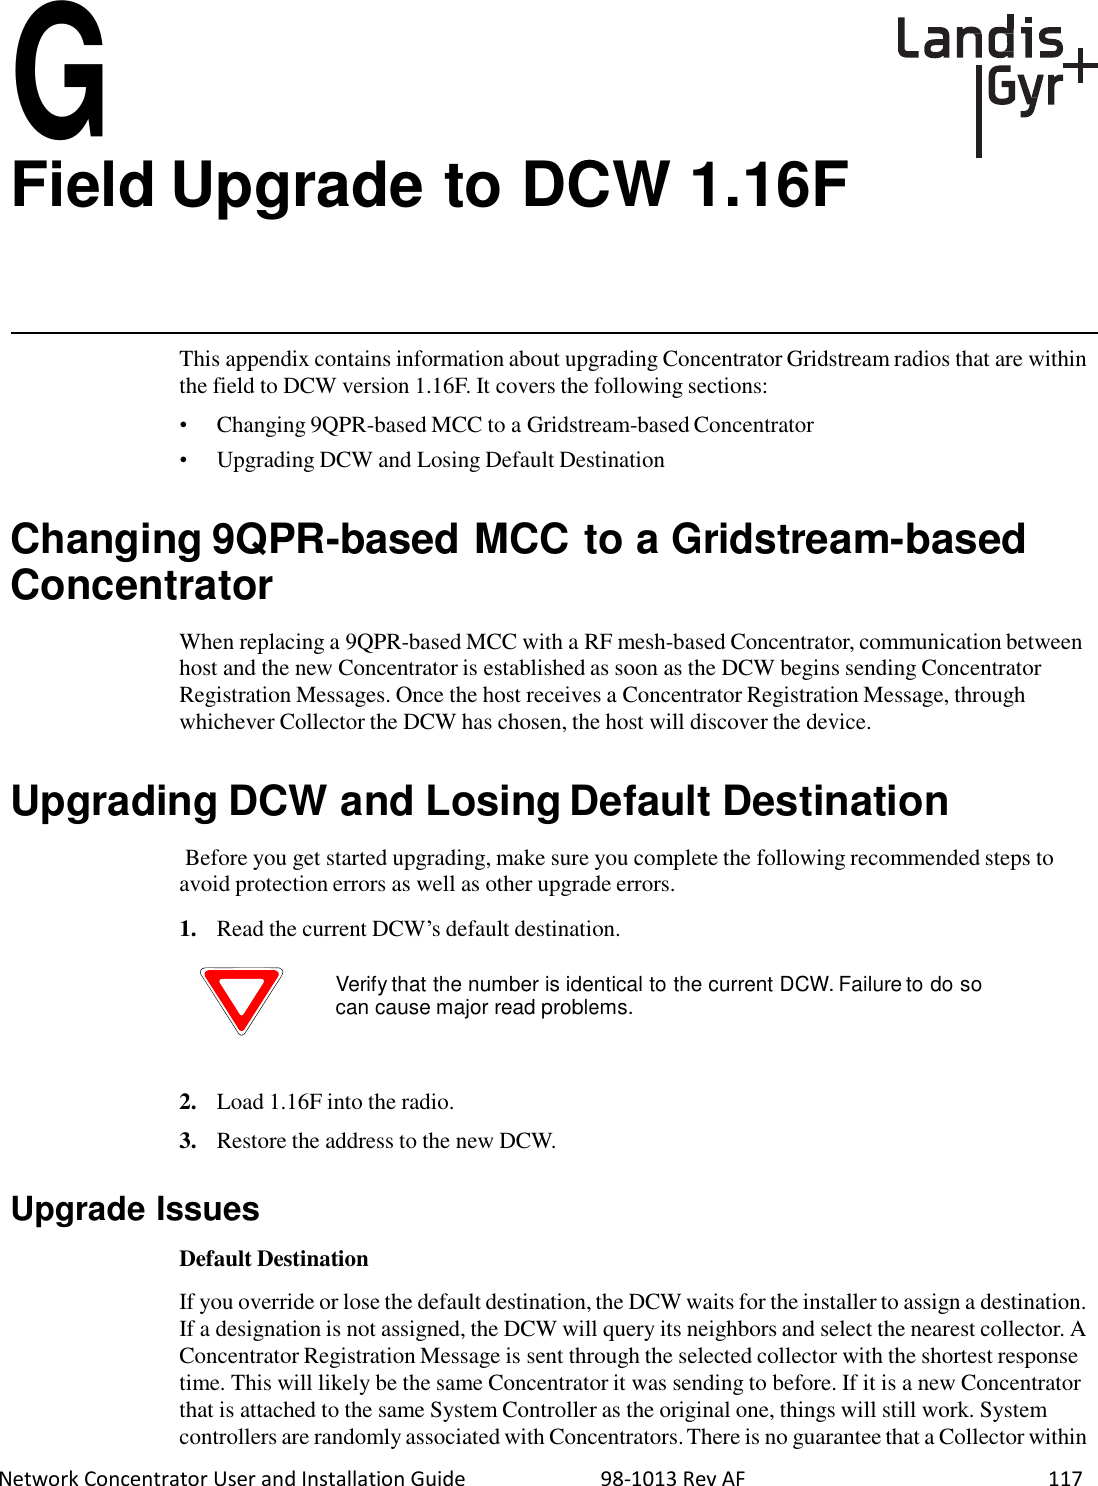  Network Concentrator User and Installation Guide                          98-1013 Rev AF    117  G Field Upgrade to DCW 1.16F       This appendix contains information about upgrading Concentrator Gridstream radios that are within the field to DCW version 1.16F. It covers the following sections:  •  Changing 9QPR-based MCC to a Gridstream-based Concentrator •  Upgrading DCW and Losing Default Destination   Changing 9QPR-based MCC to a Gridstream-based Concentrator  When replacing a 9QPR-based MCC with a RF mesh-based Concentrator, communication between host and the new Concentrator is established as soon as the DCW begins sending Concentrator Registration Messages. Once the host receives a Concentrator Registration Message, through whichever Collector the DCW has chosen, the host will discover the device.   Upgrading DCW and Losing Default Destination  Before you get started upgrading, make sure you complete the following recommended steps to avoid protection errors as well as other upgrade errors.  1.   Read the current DCW’s default destination.  Verify that the number is identical to the current DCW. Failure to do so can cause major read problems.    2.   Load 1.16F into the radio.  3.   Restore the address to the new DCW.   Upgrade Issues  Default Destination  If you override or lose the default destination, the DCW waits for the installer to assign a destination. If a designation is not assigned, the DCW will query its neighbors and select the nearest collector. A Concentrator Registration Message is sent through the selected collector with the shortest response time. This will likely be the same Concentrator it was sending to before. If it is a new Concentrator that is attached to the same System Controller as the original one, things will still work. System controllers are randomly associated with Concentrators. There is no guarantee that a Collector within